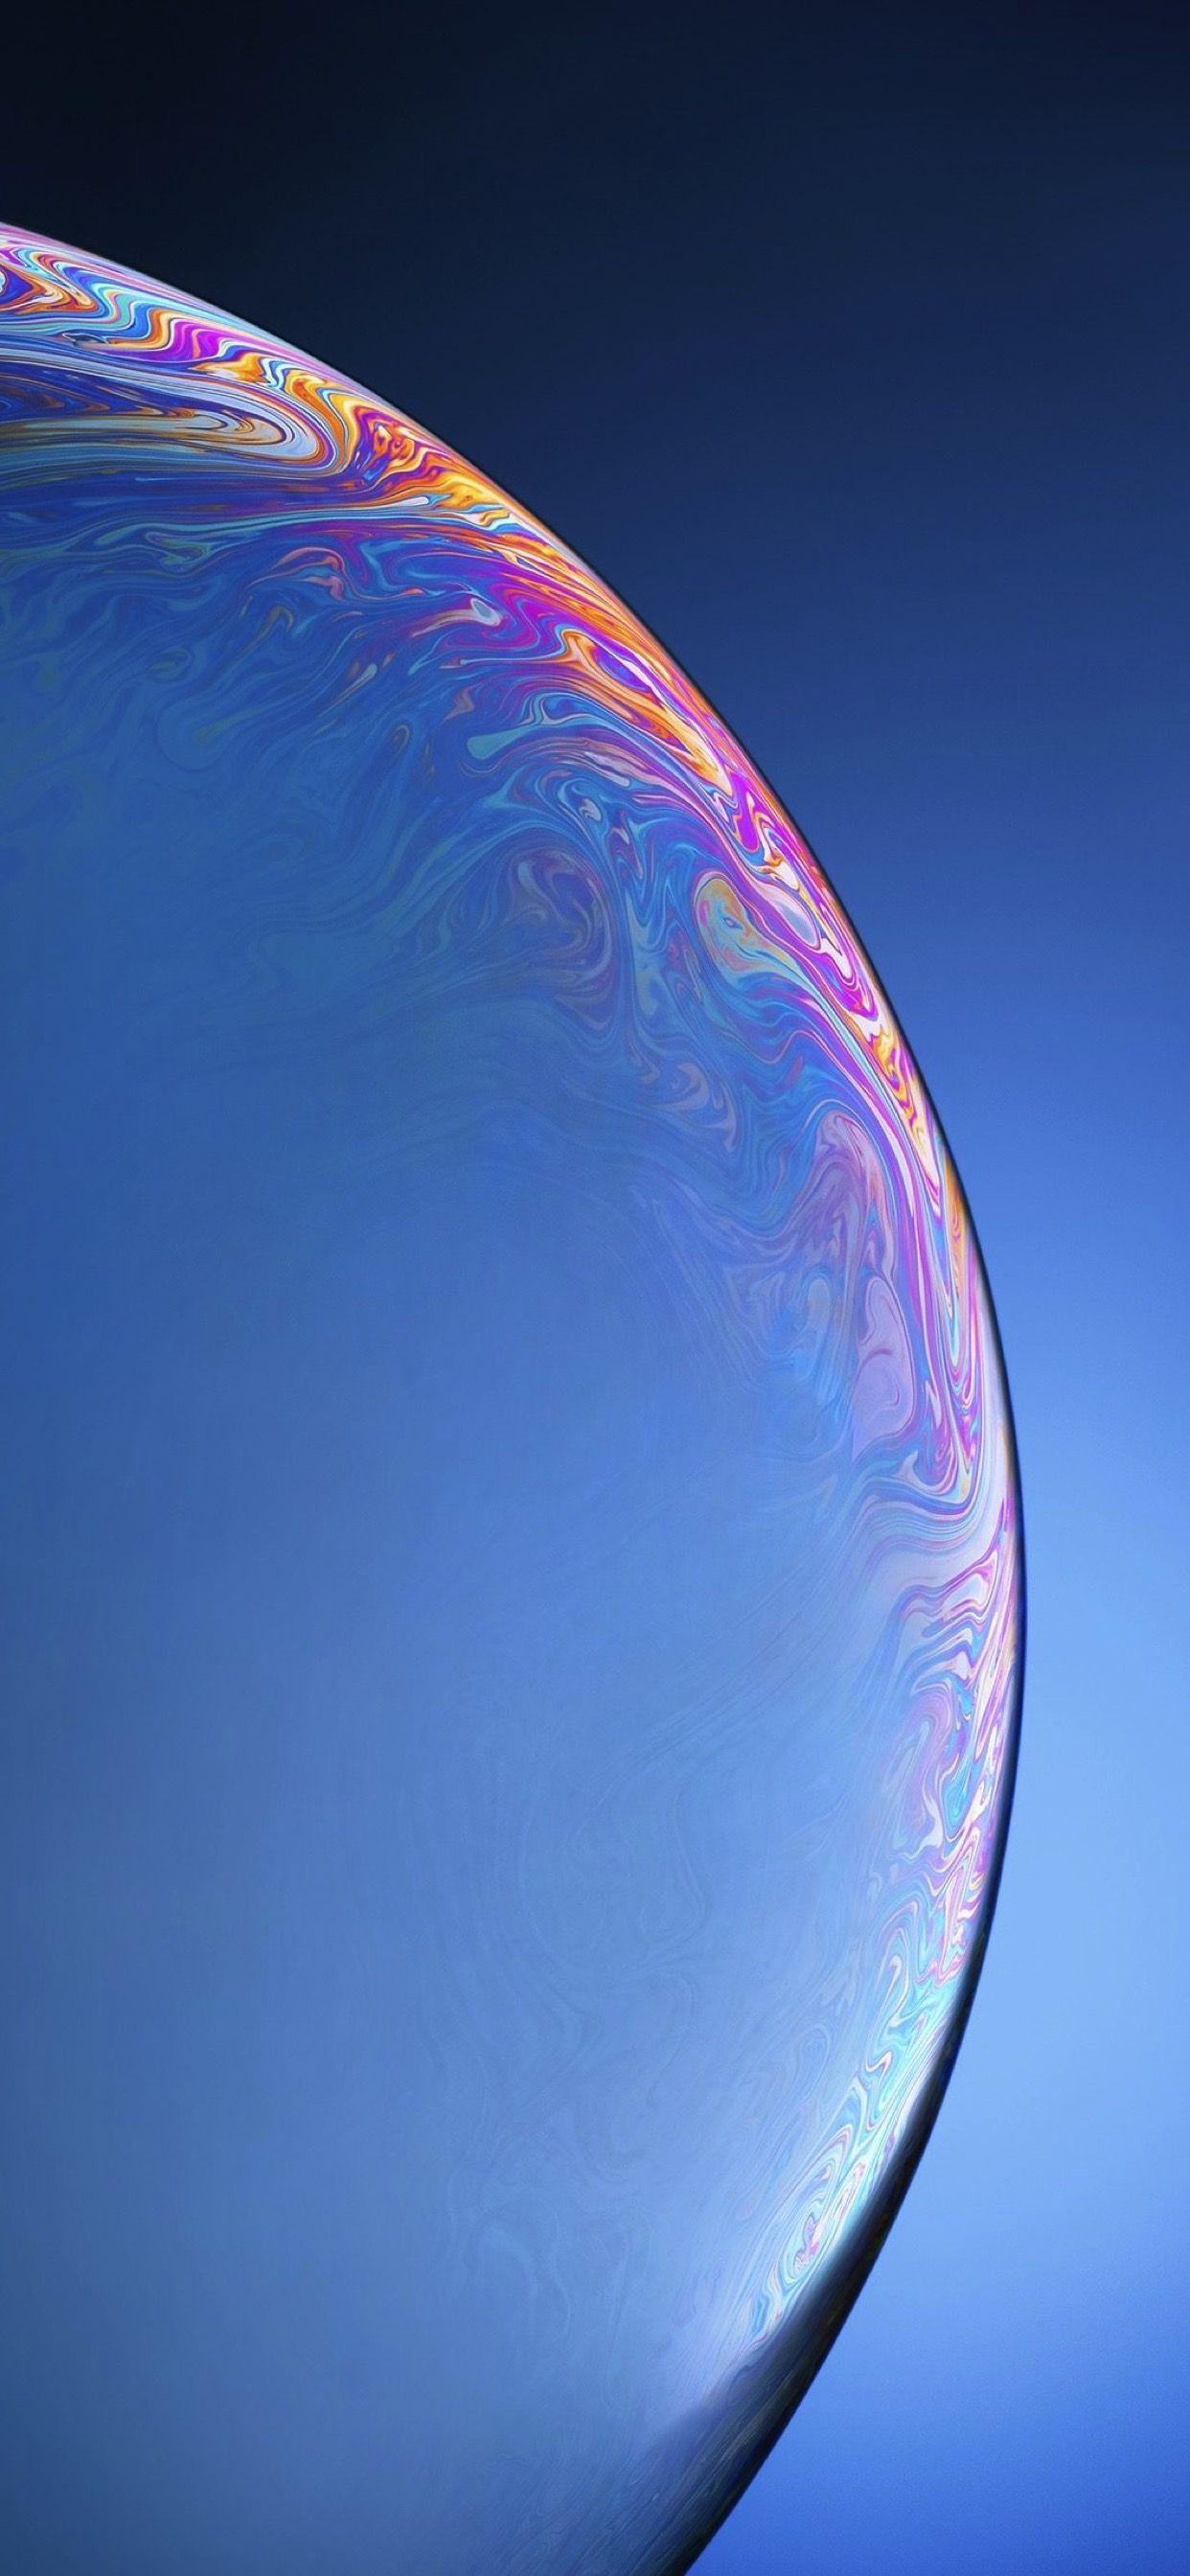 21 Amazing Iphone Xs Max Earth Wallpapers Wallpaper Box